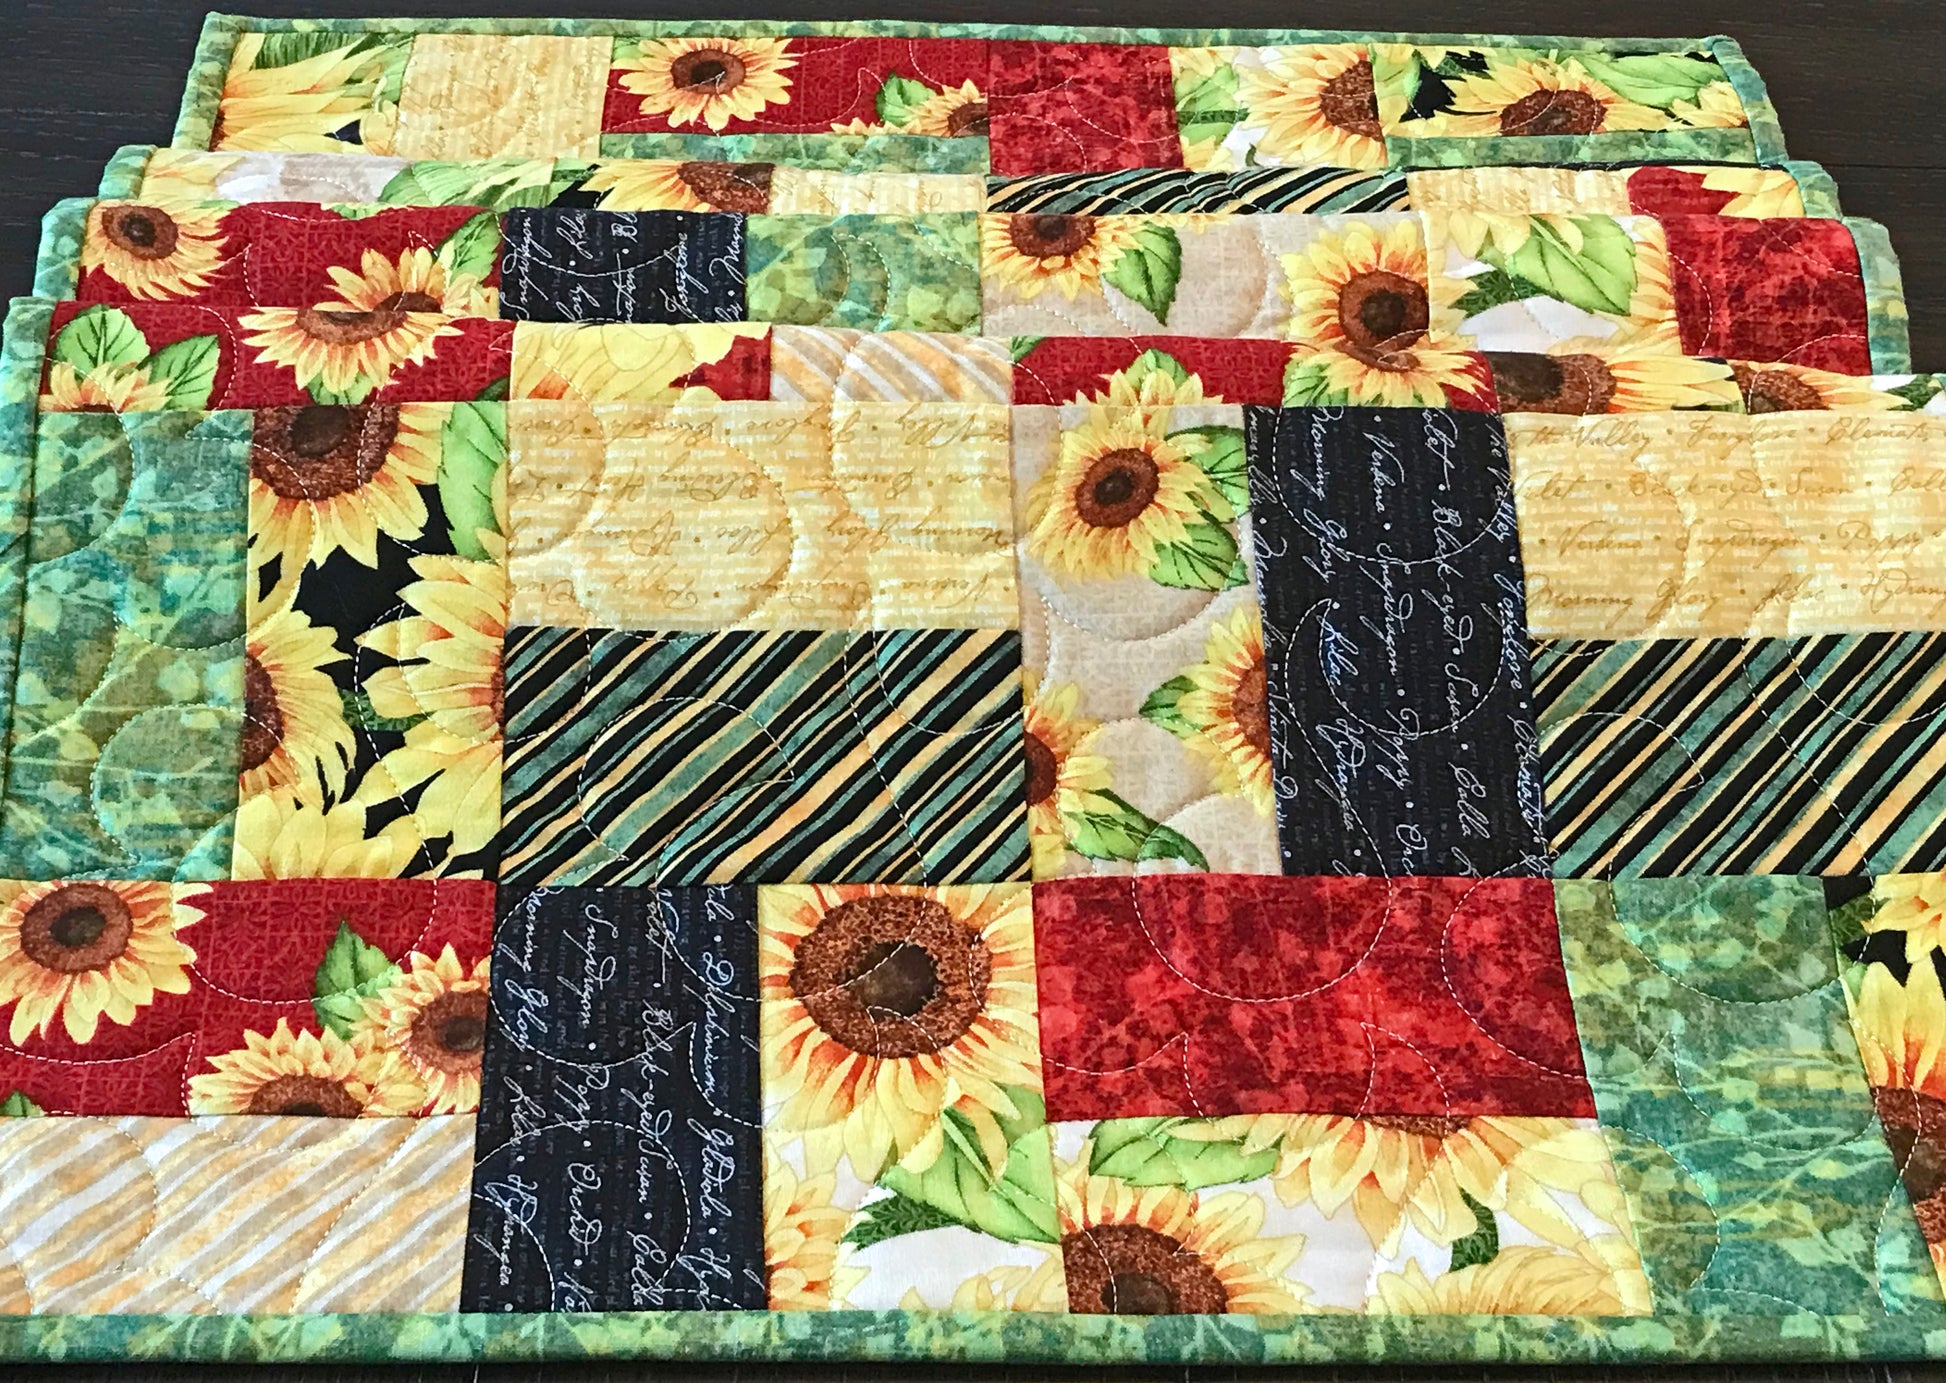 Sunflower Patchwork Table Runner - Handmade Quilts, Digital Patterns, and Home Décor items online - Cuddle Cat Quiltworks